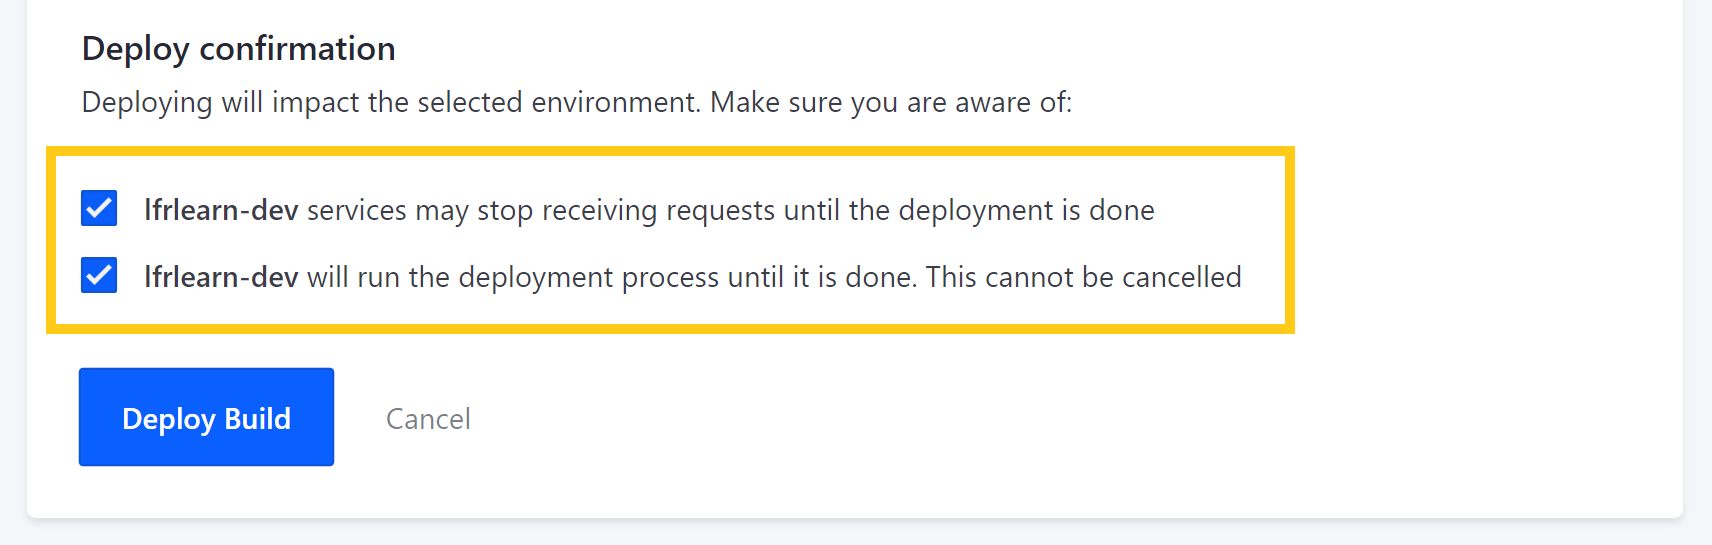 Use the checkboxes to confirm your deployment, and click on Deploy Build.